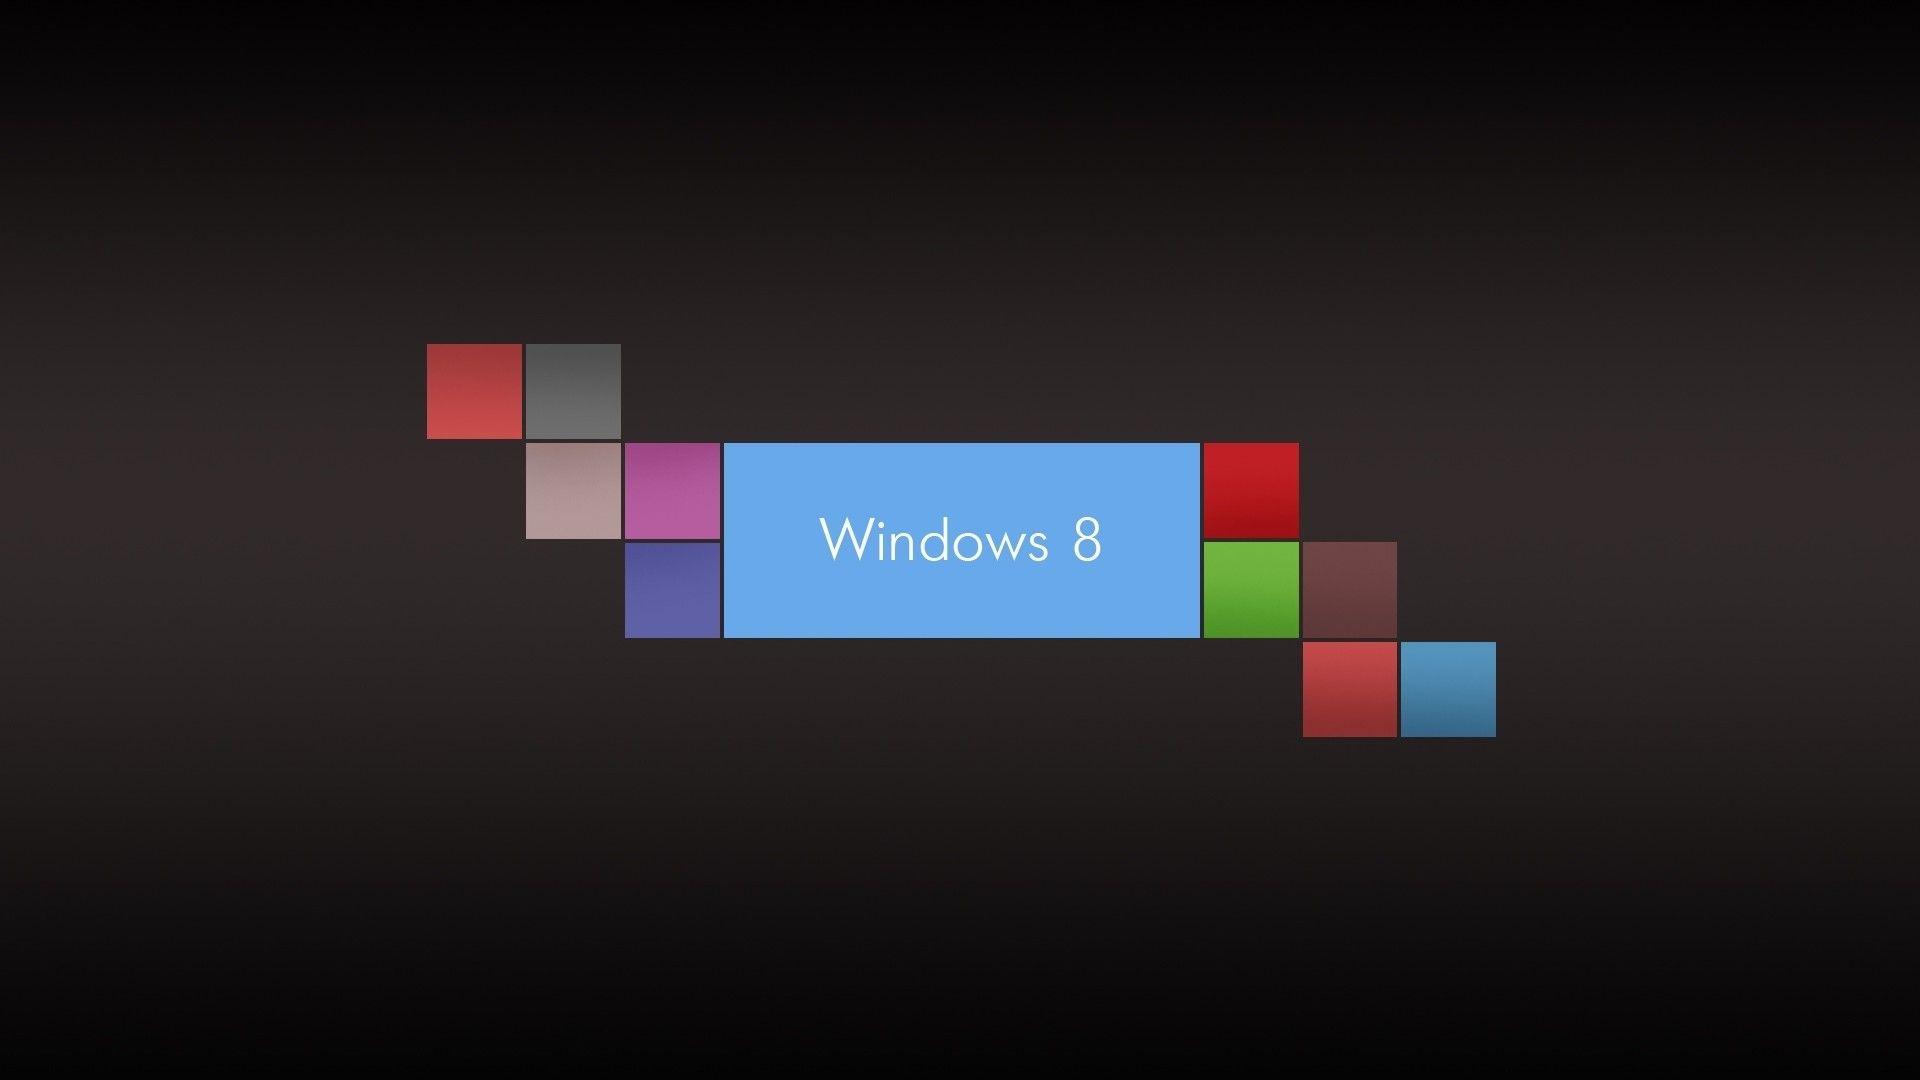 Simple Window 8 Logo - I need a new, simple and elegant Win10 1080p Wallpaper like this